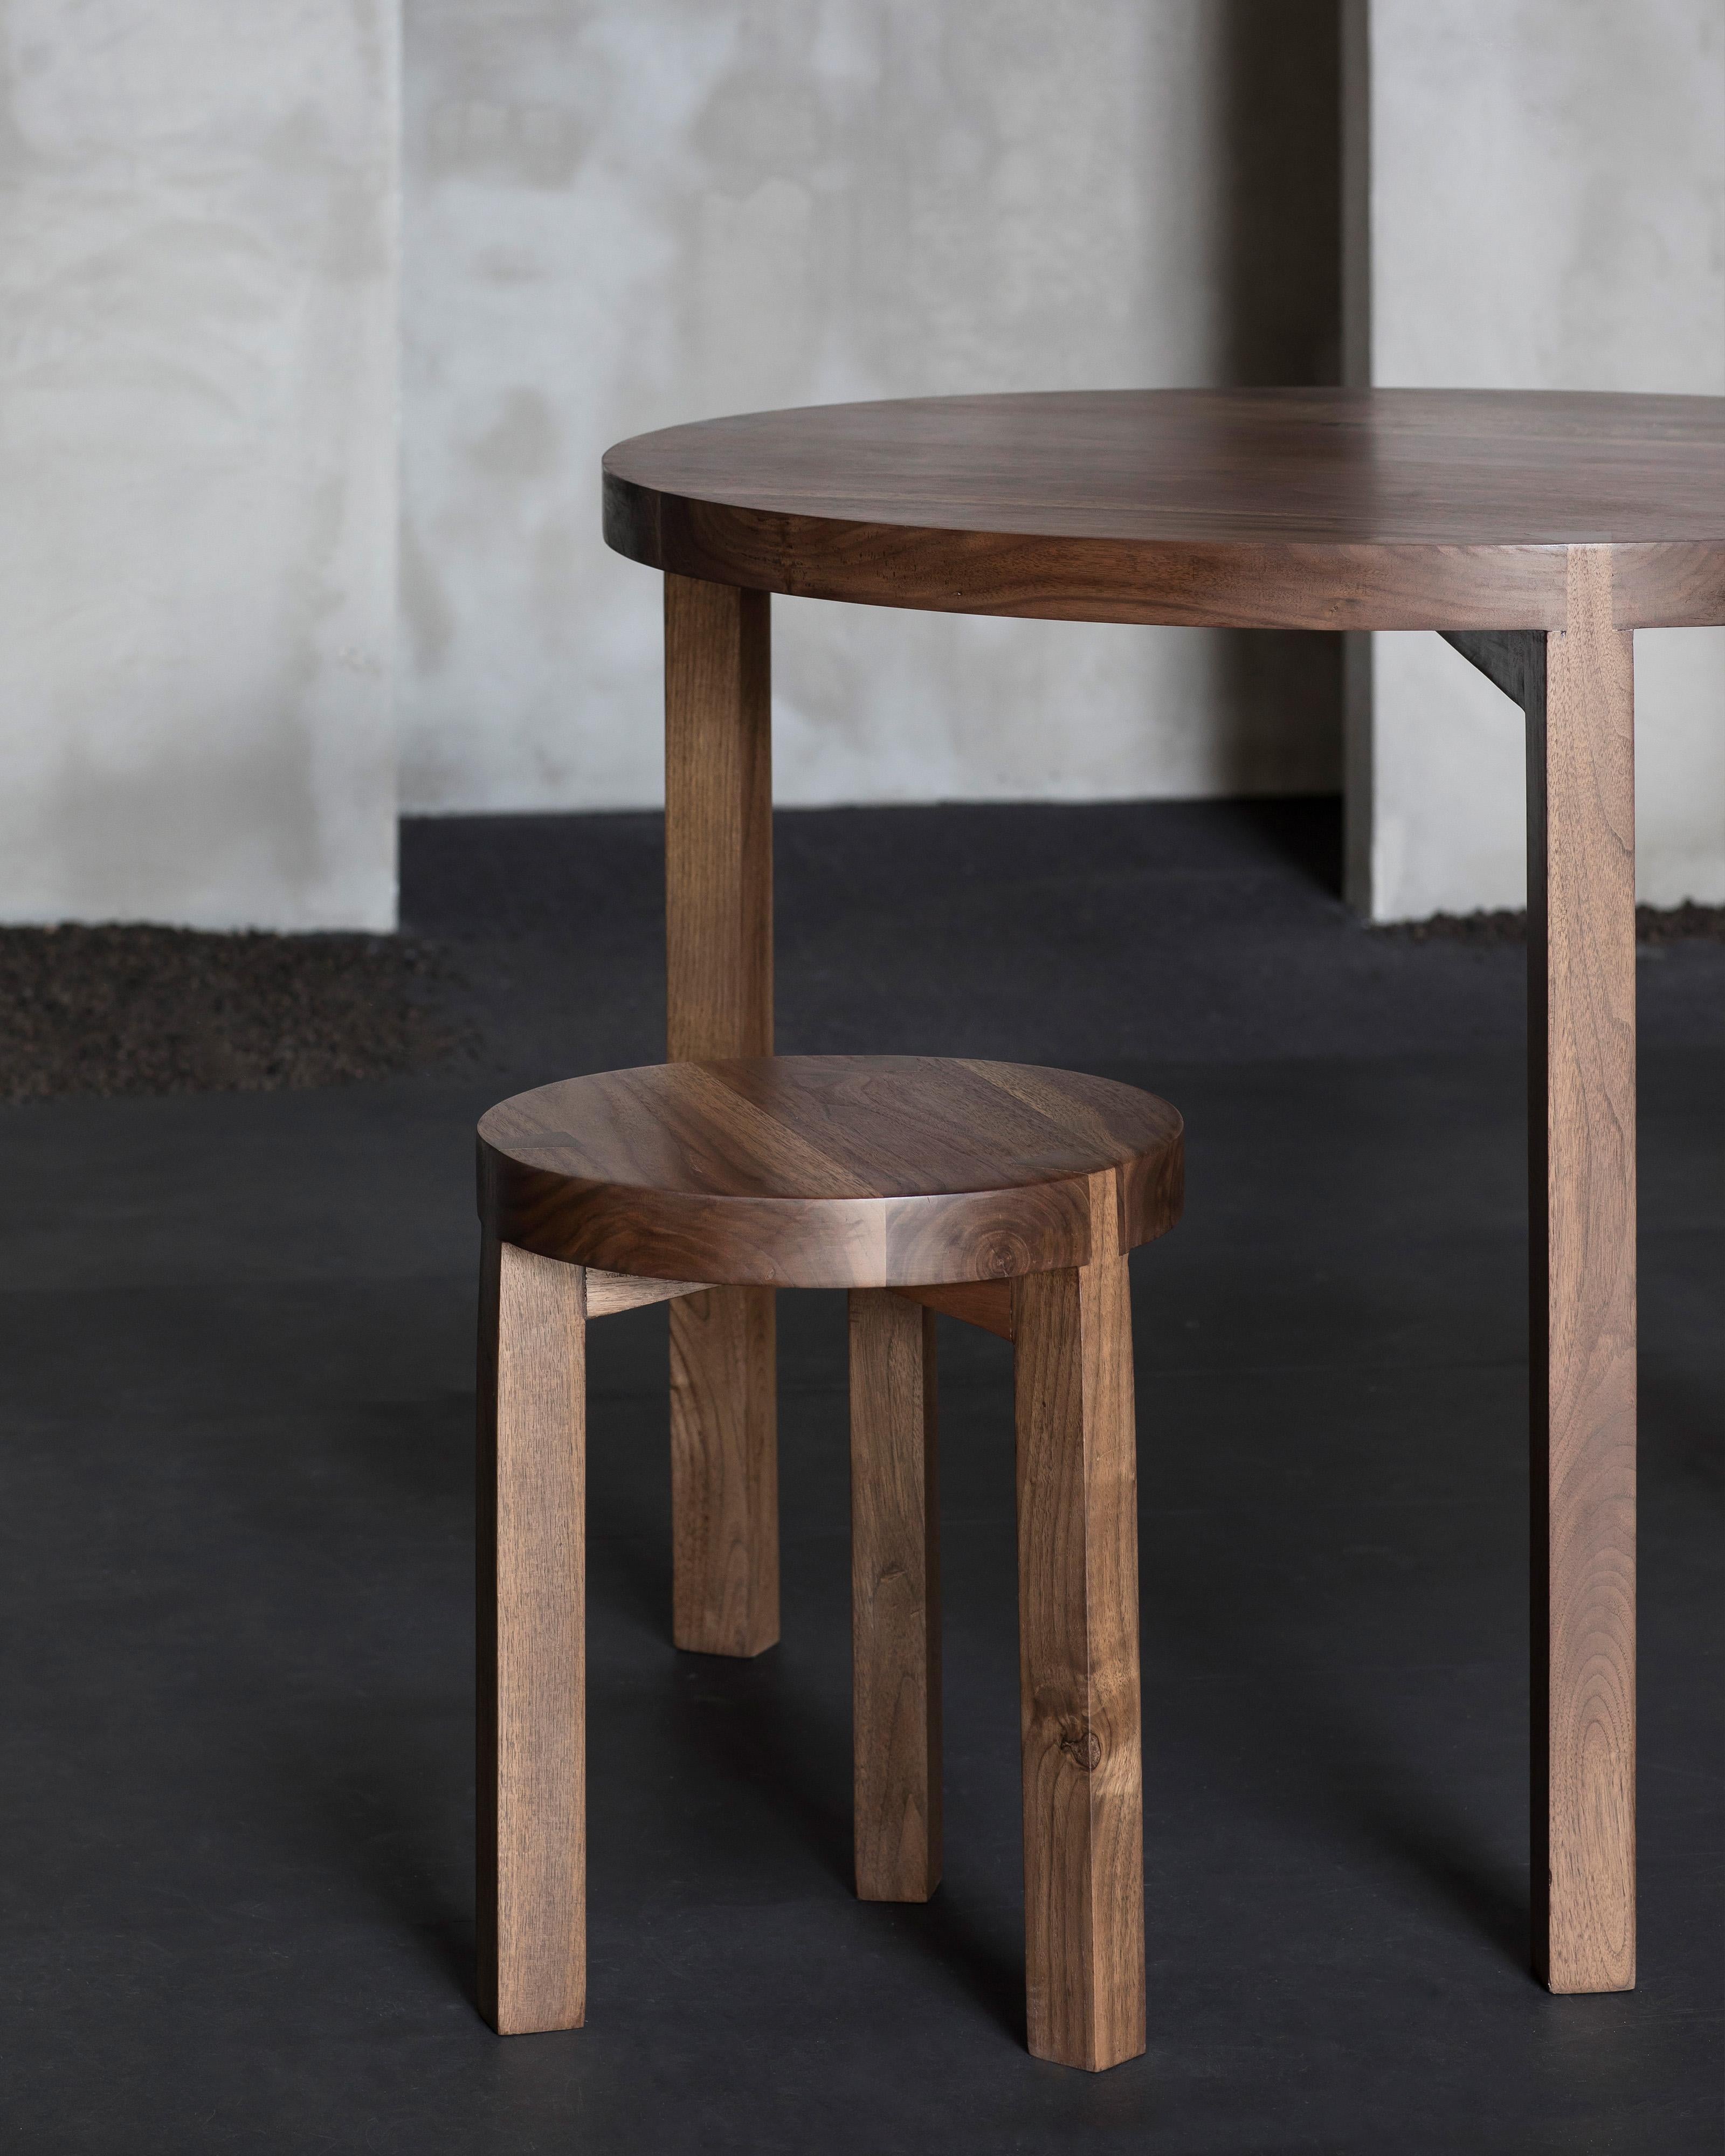 Stool in Walnut 'Solid' by Atelier 365 x Valerie Objects
Dimensions: D. 35 x H. 45

Fascinated by traditional wood joints, Greindl constructs wooden furniture without any nails or screws. Every joint is cut by hand, using chisels and a Japanese